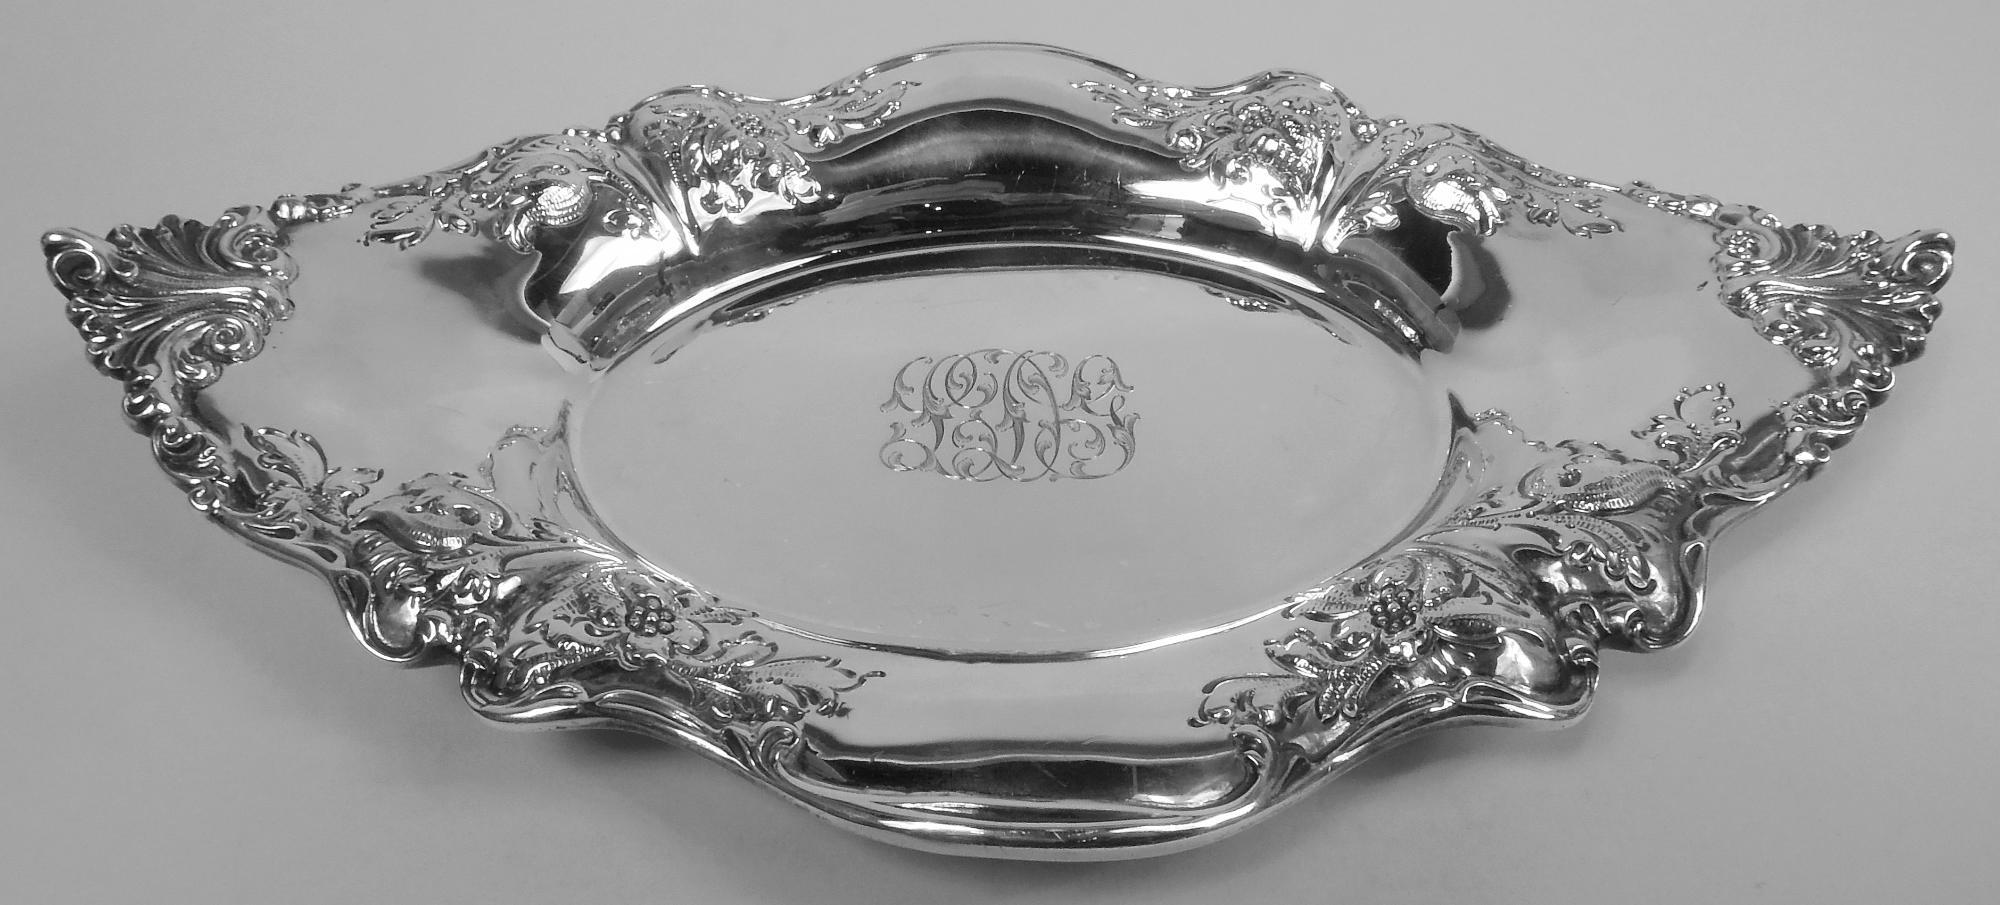 Antique Dominick & Haff Edwardian Sterling Silver Gravy Boat on Stand For Sale 3